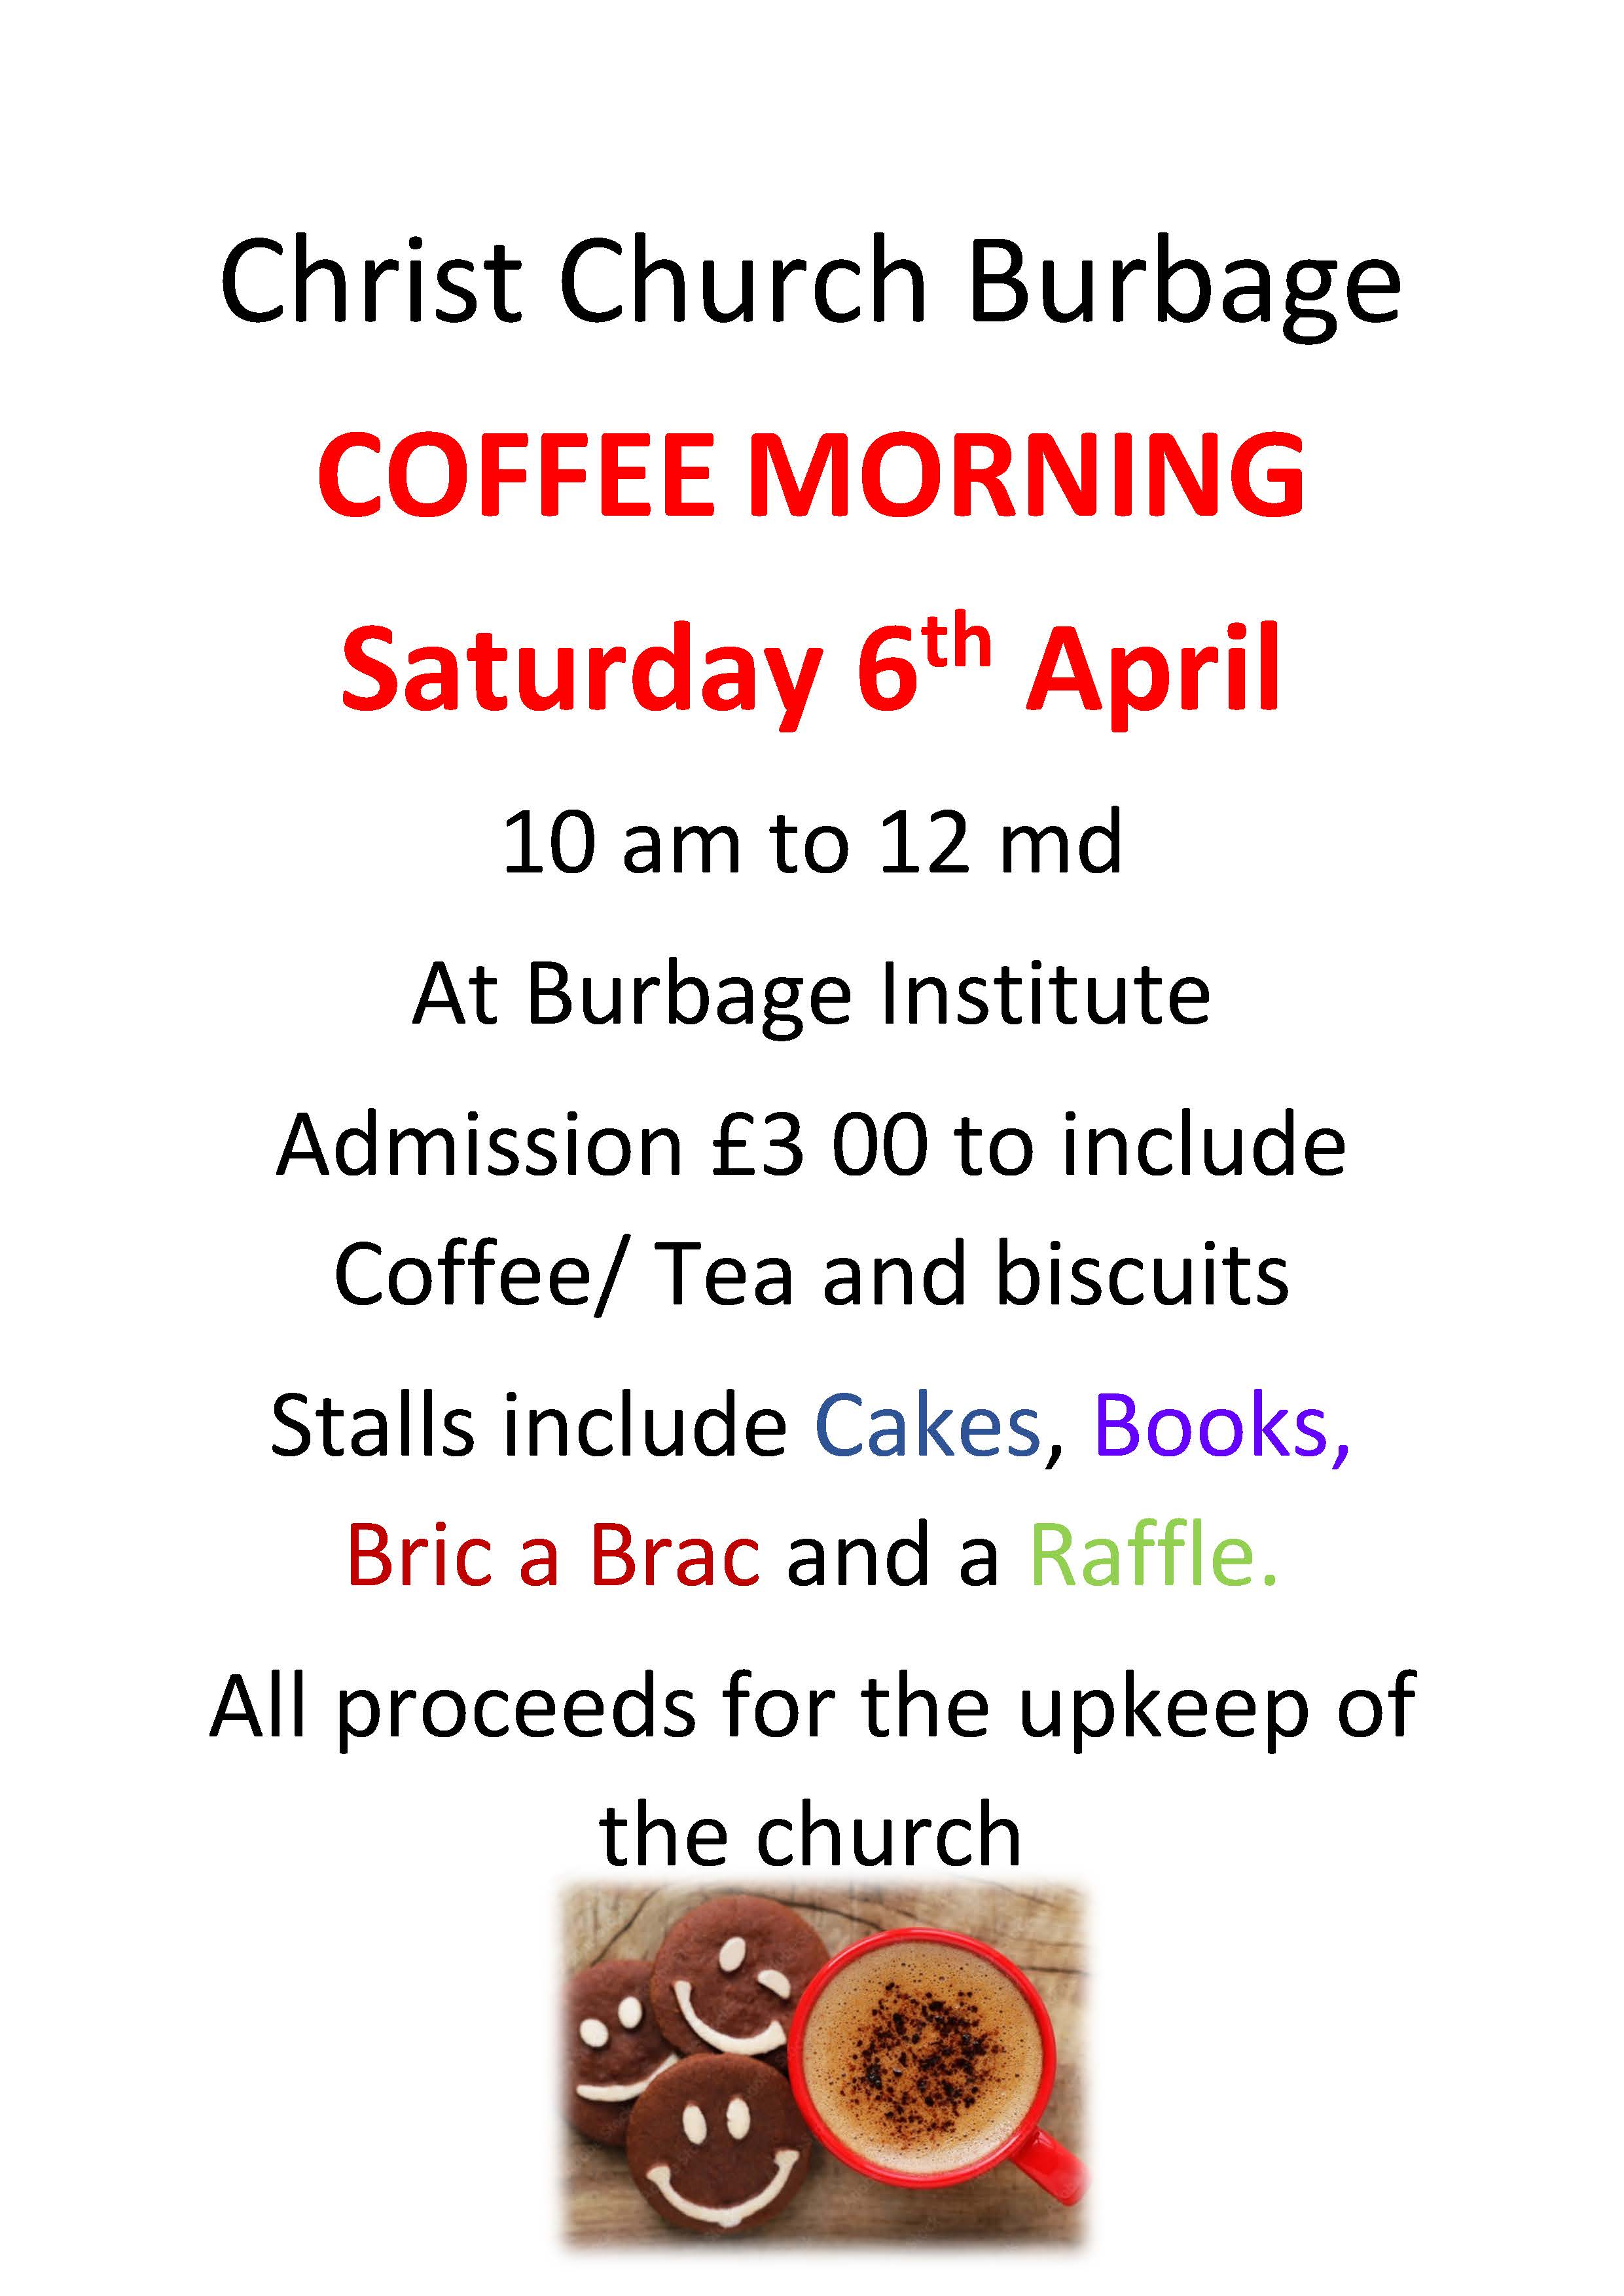 Coffee Morning Burbage 6 April 10am - 12 noon